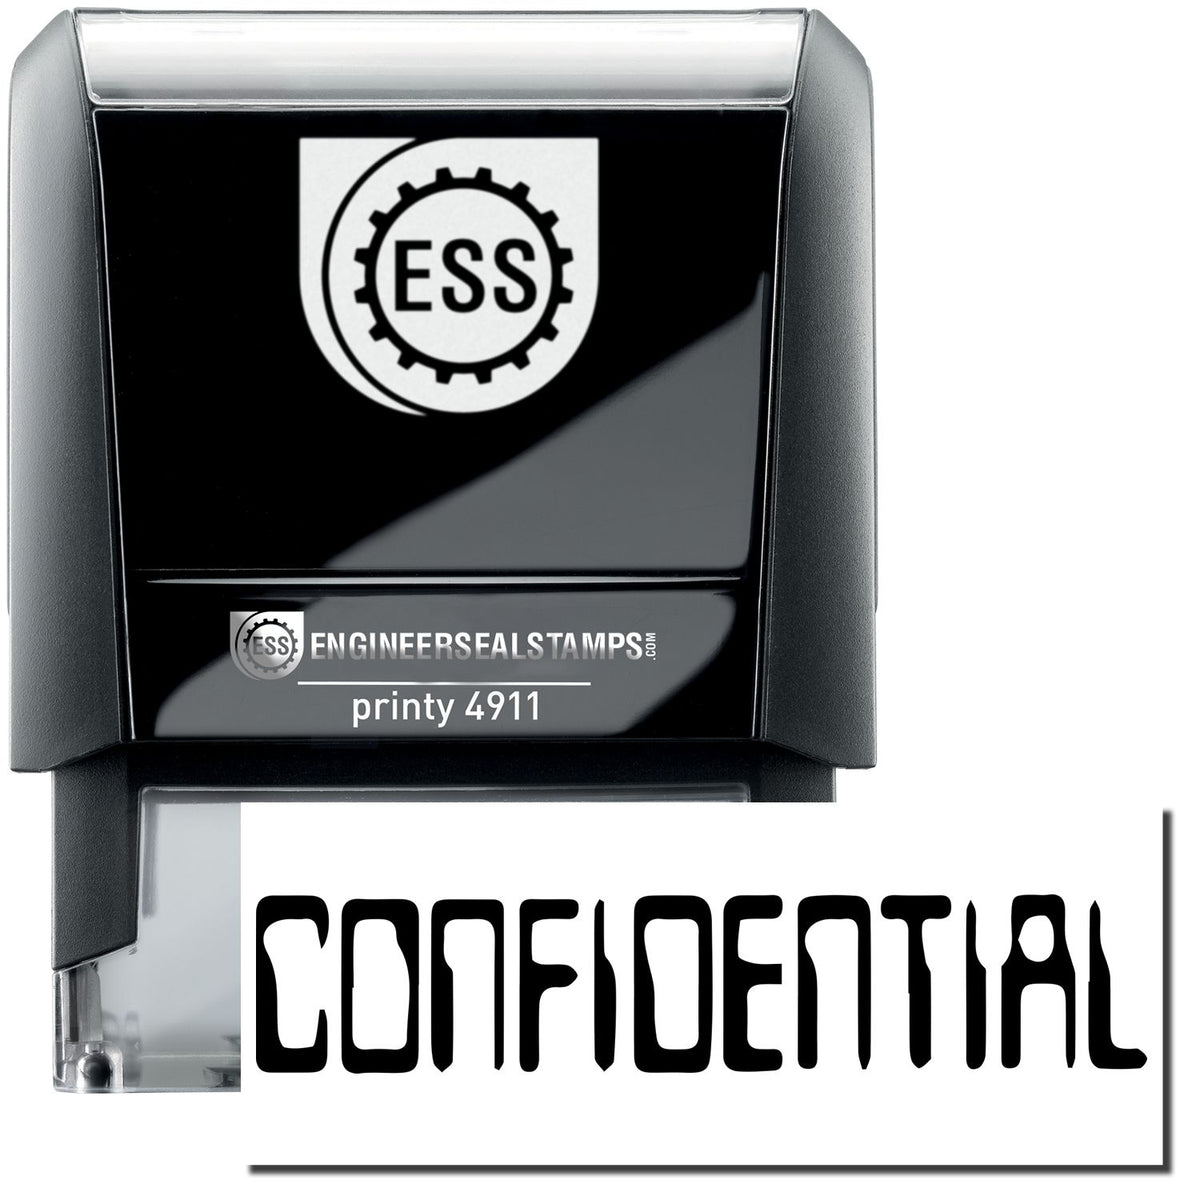 A self-inking stamp with a stamped image showing how the text &quot;CONFIDENTIAL&quot; in a barcode font is displayed after stamping.